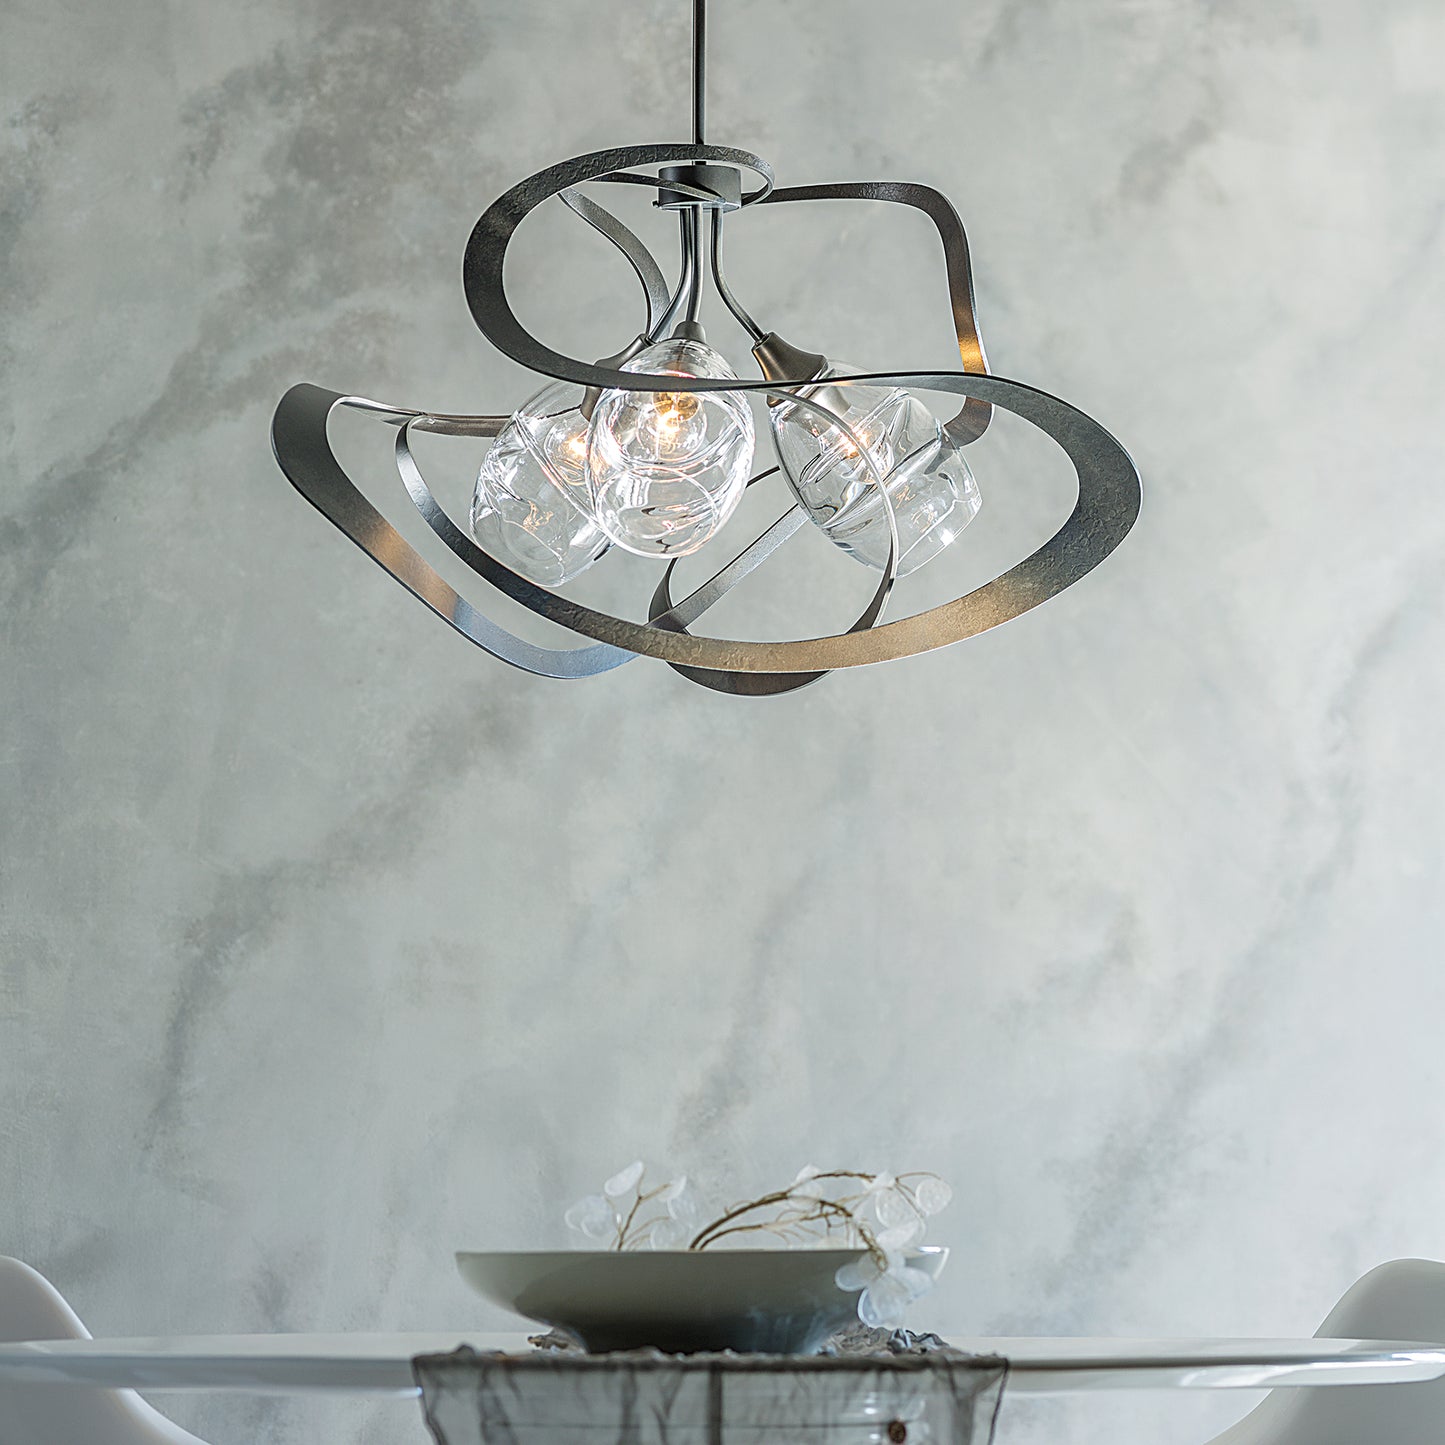 A handcrafted dining room with a Hubbardton Forge Nest Pendant hanging over a table.